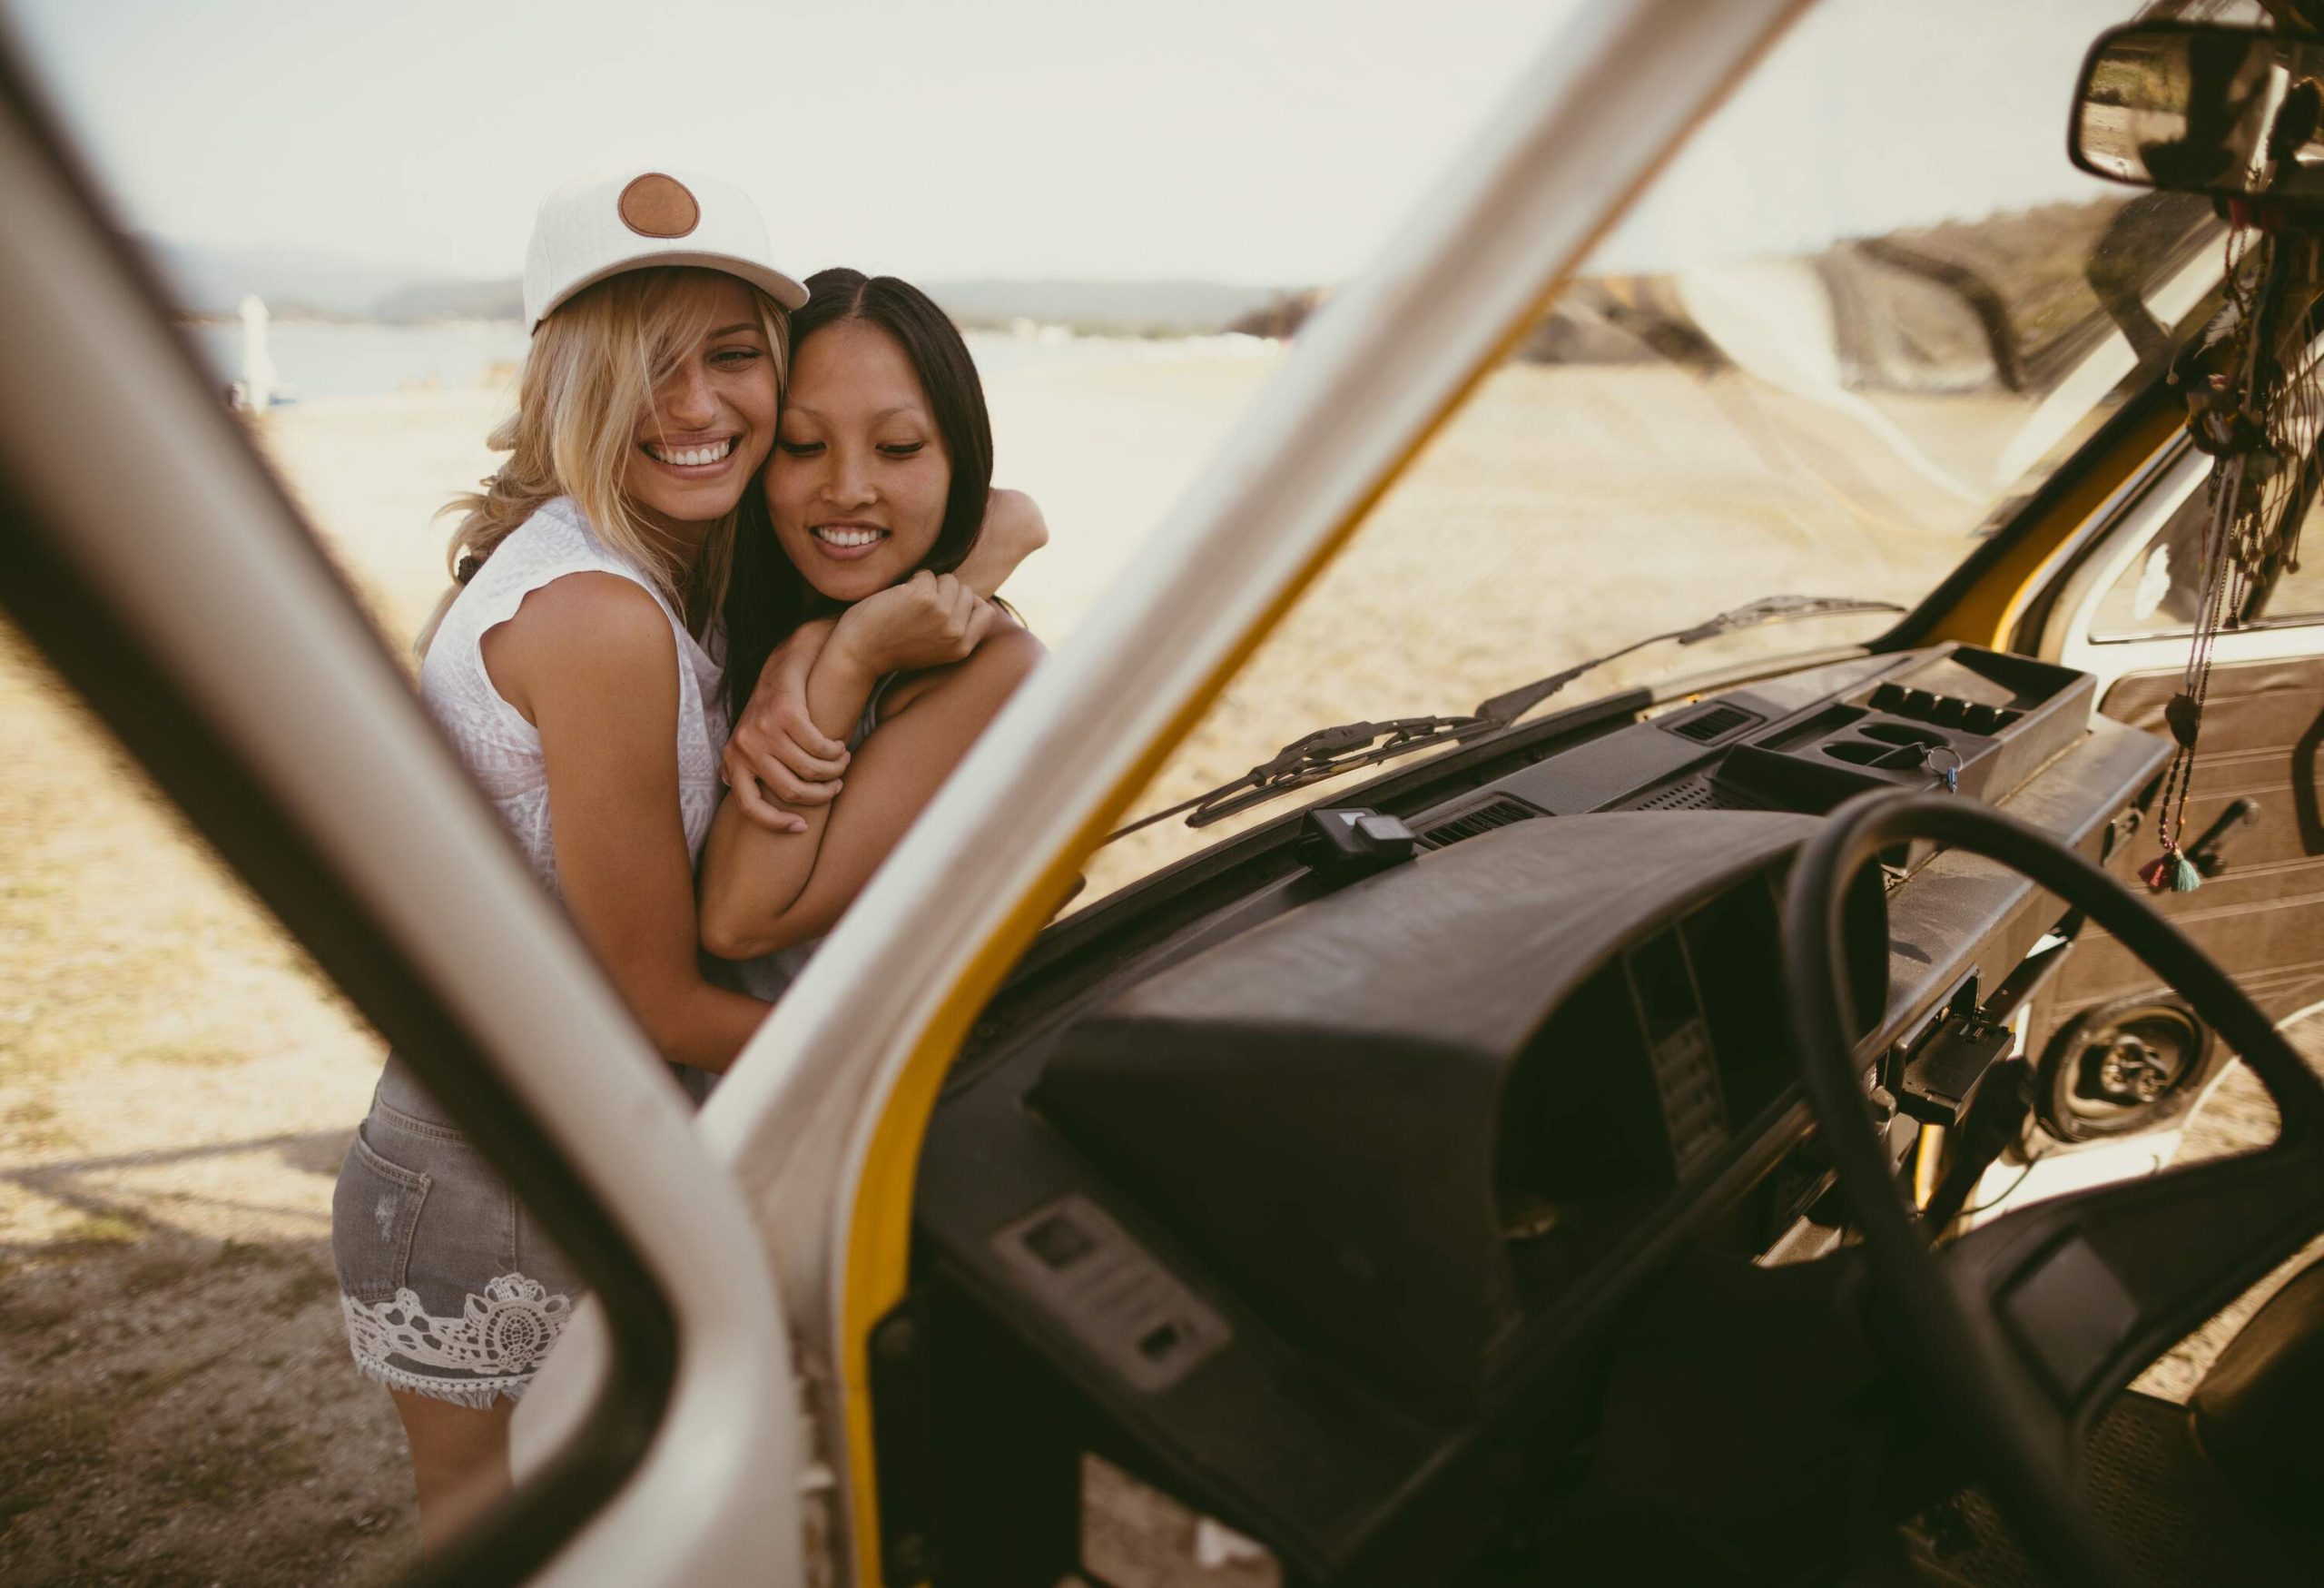 Two happy women hug in front of a vehicle parked by the shore.